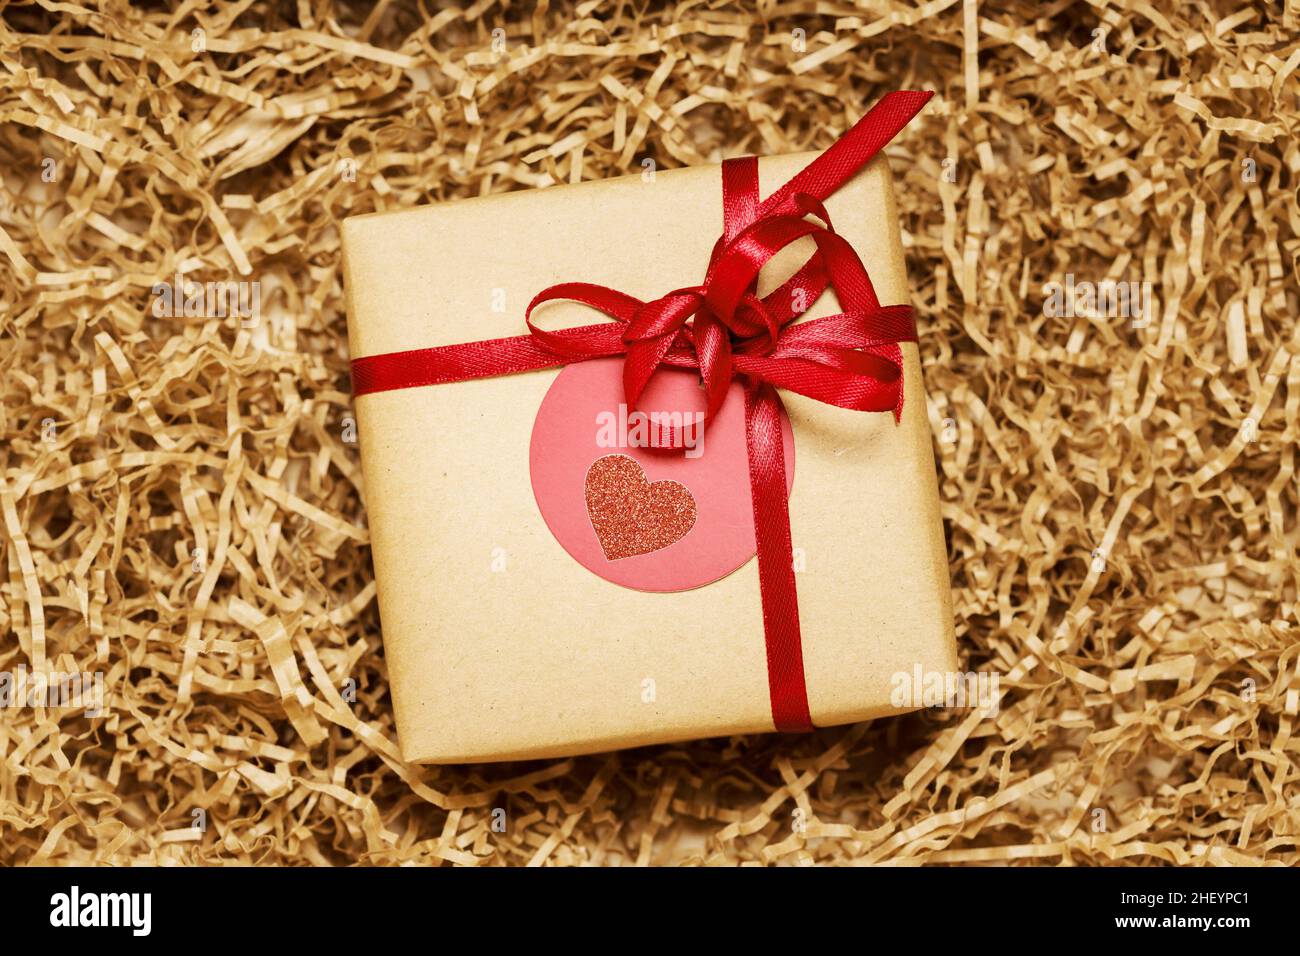 Present box wrapped in brown craft paper with red ribbon, filled with paper filler, top view from above Stock Photo